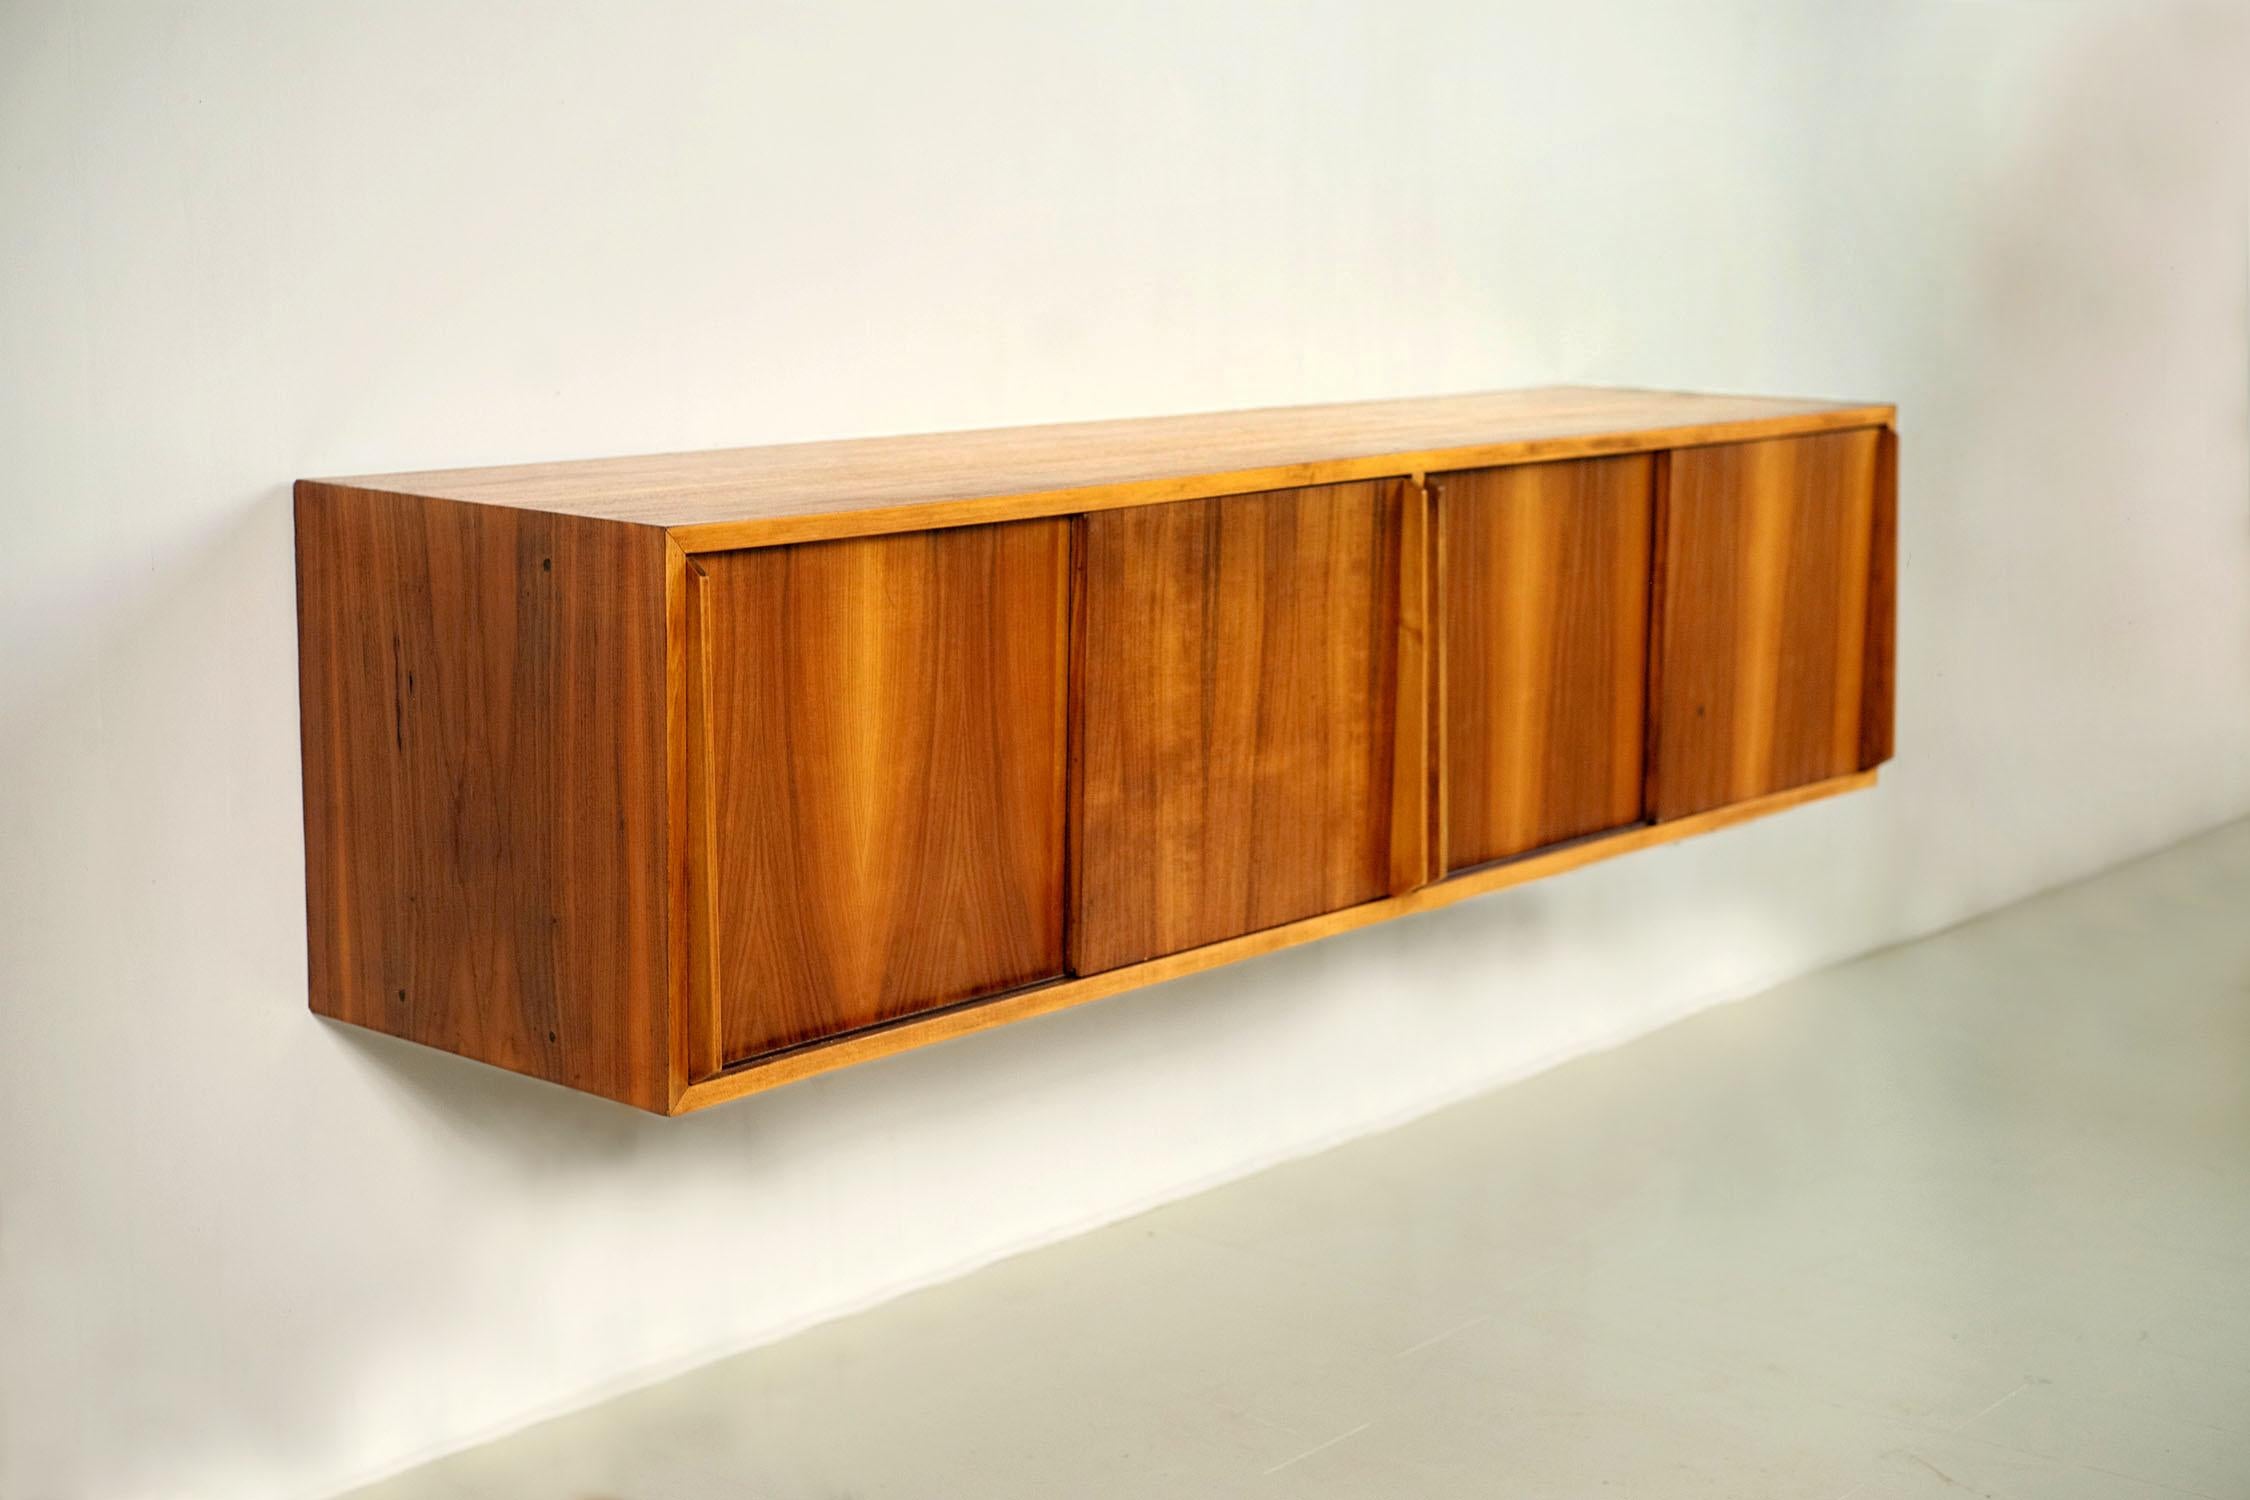 Hanging sideboard in flamed walnut, Italy 1955. Equipped with 4 sliding doors with large handles, this superb sideboard has a central shelf. It comes from the furniture of the first apartment-hotel founded in Ventimiglia in 1955. All the specific